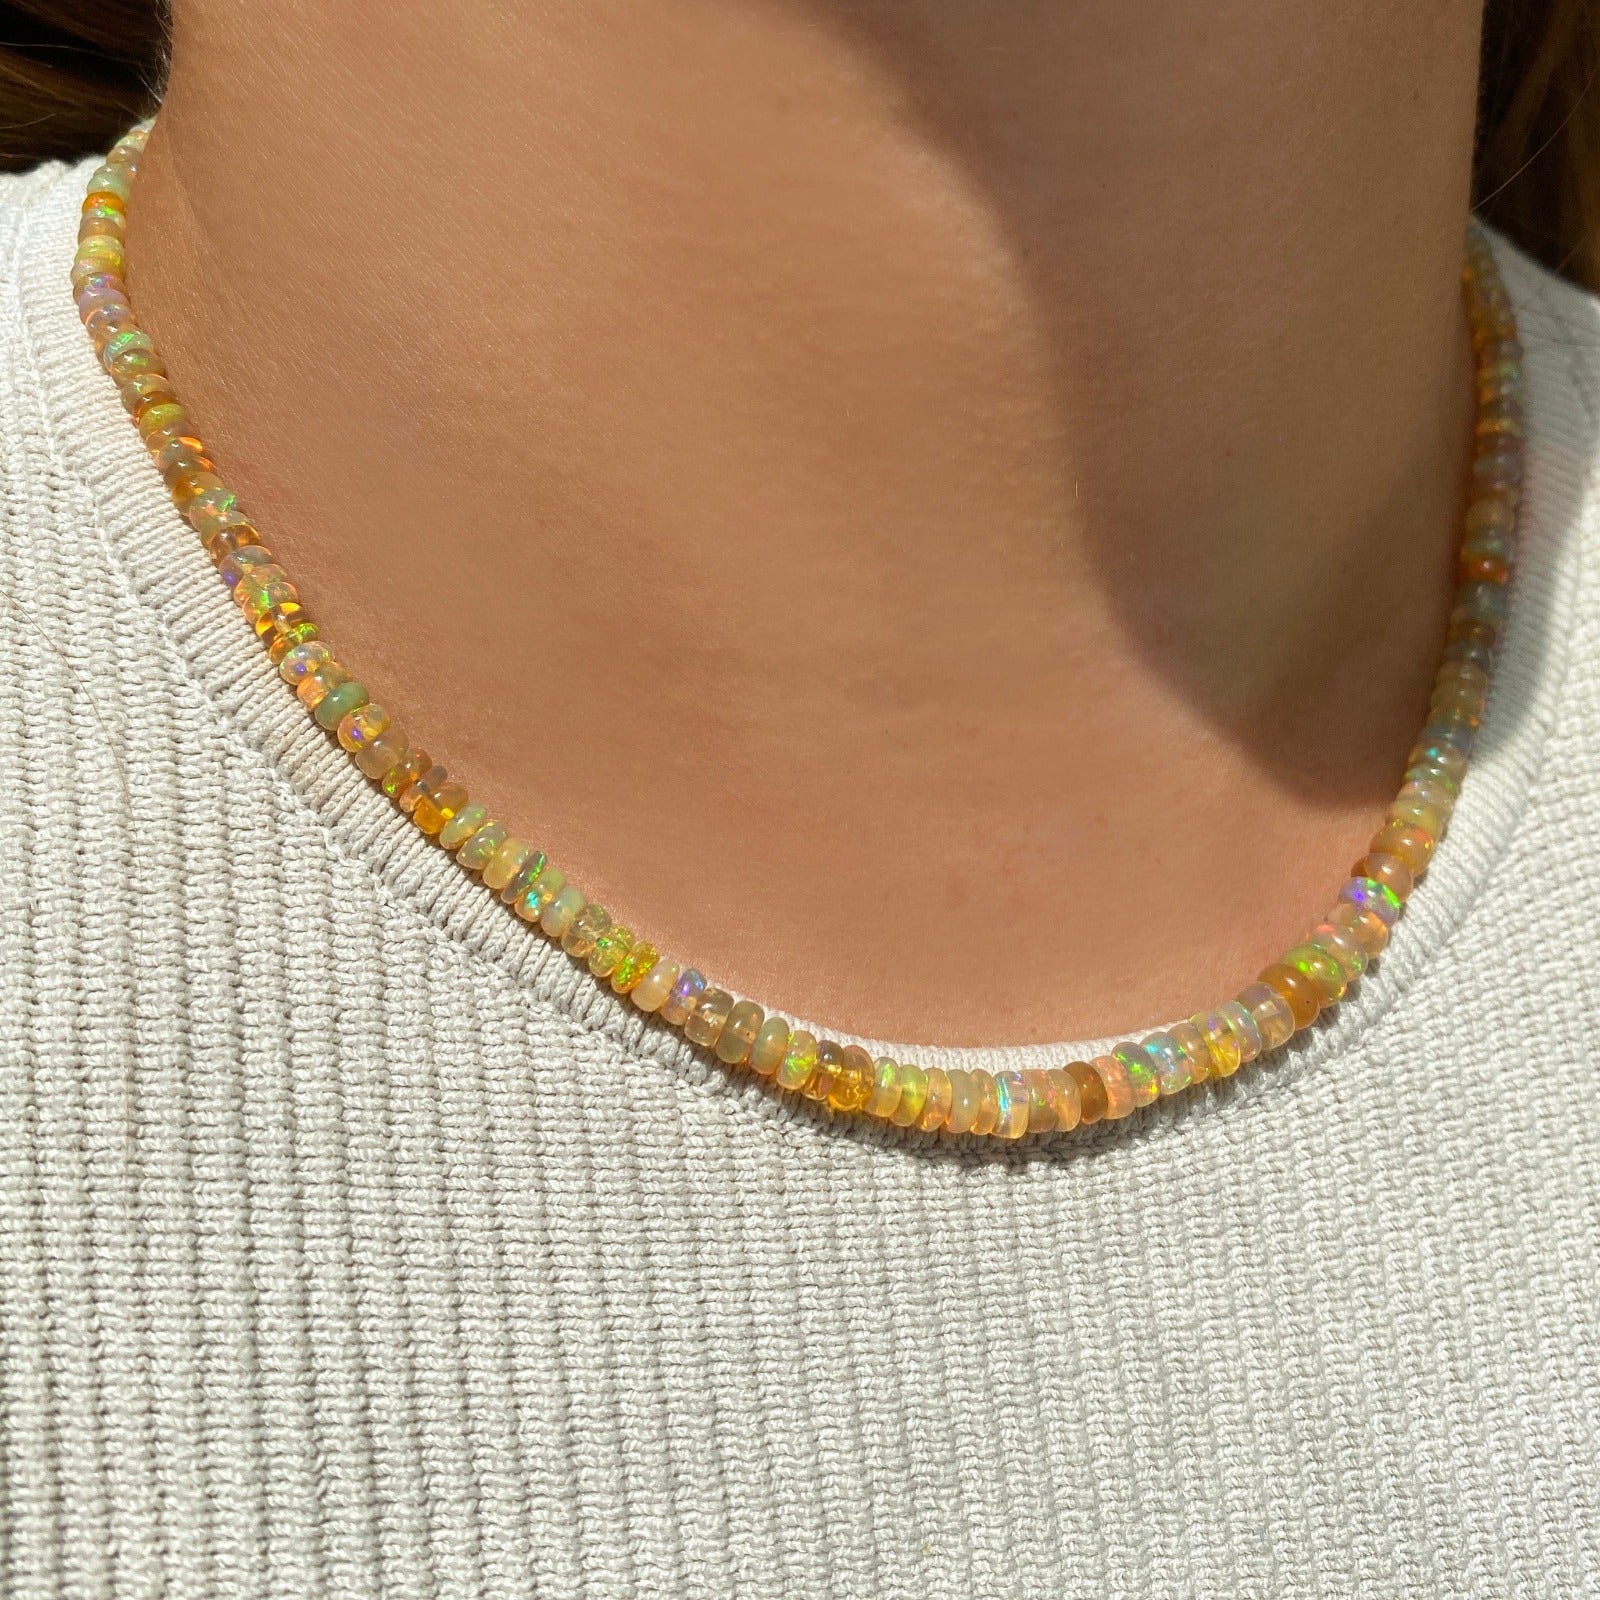 Shimmering beaded necklace made of faceted opals in shades of yellow, orange, and clear opals on a gold linking ovals clasp.